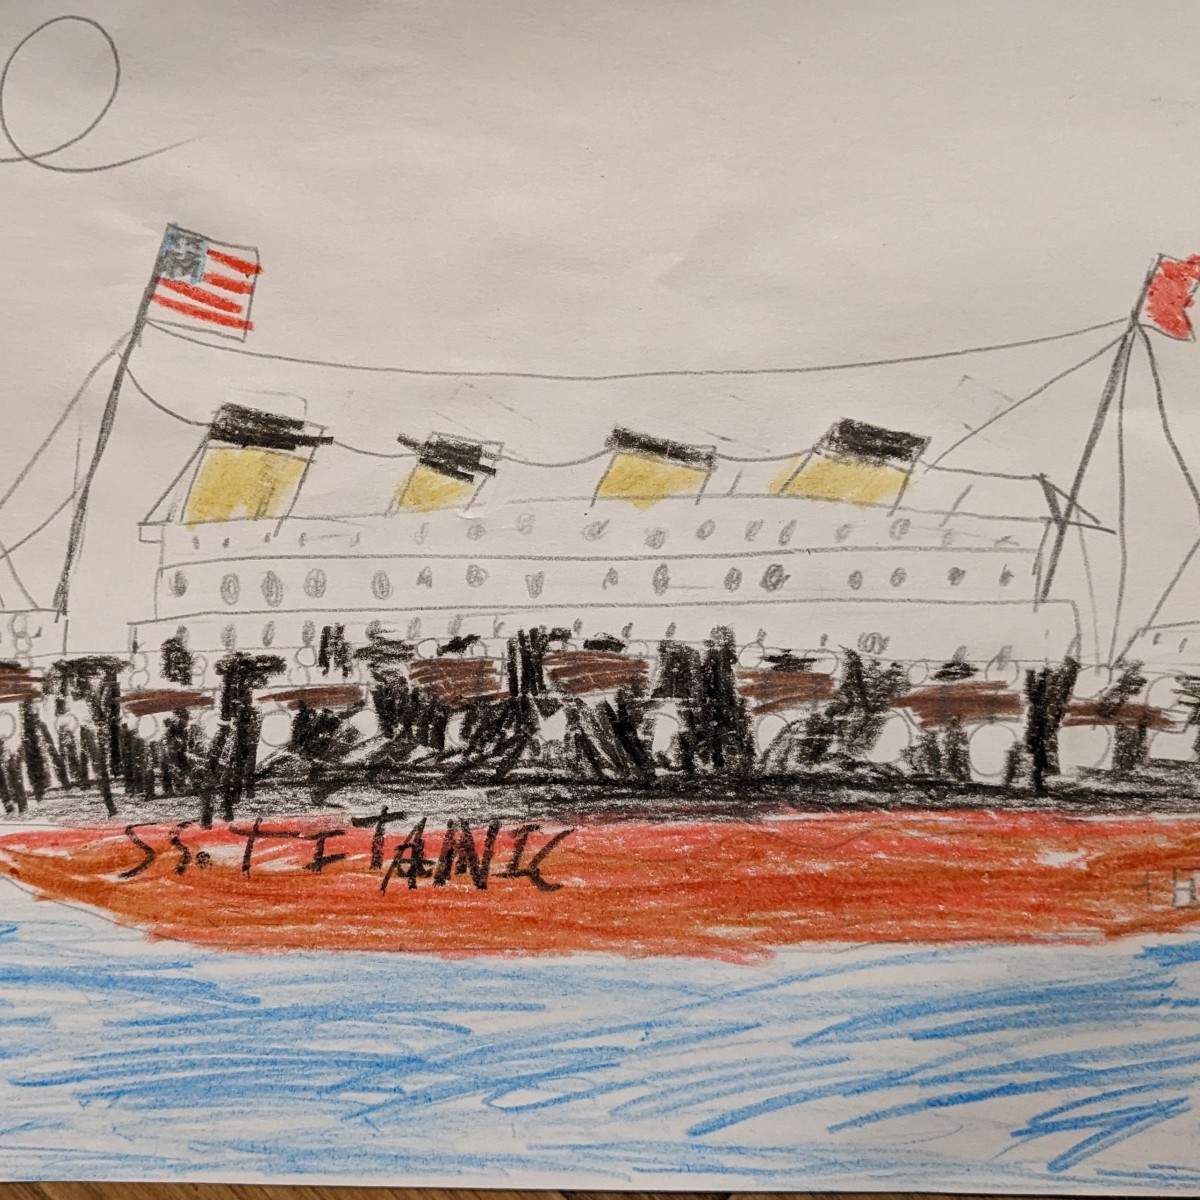 RMS Titanic by Tanner